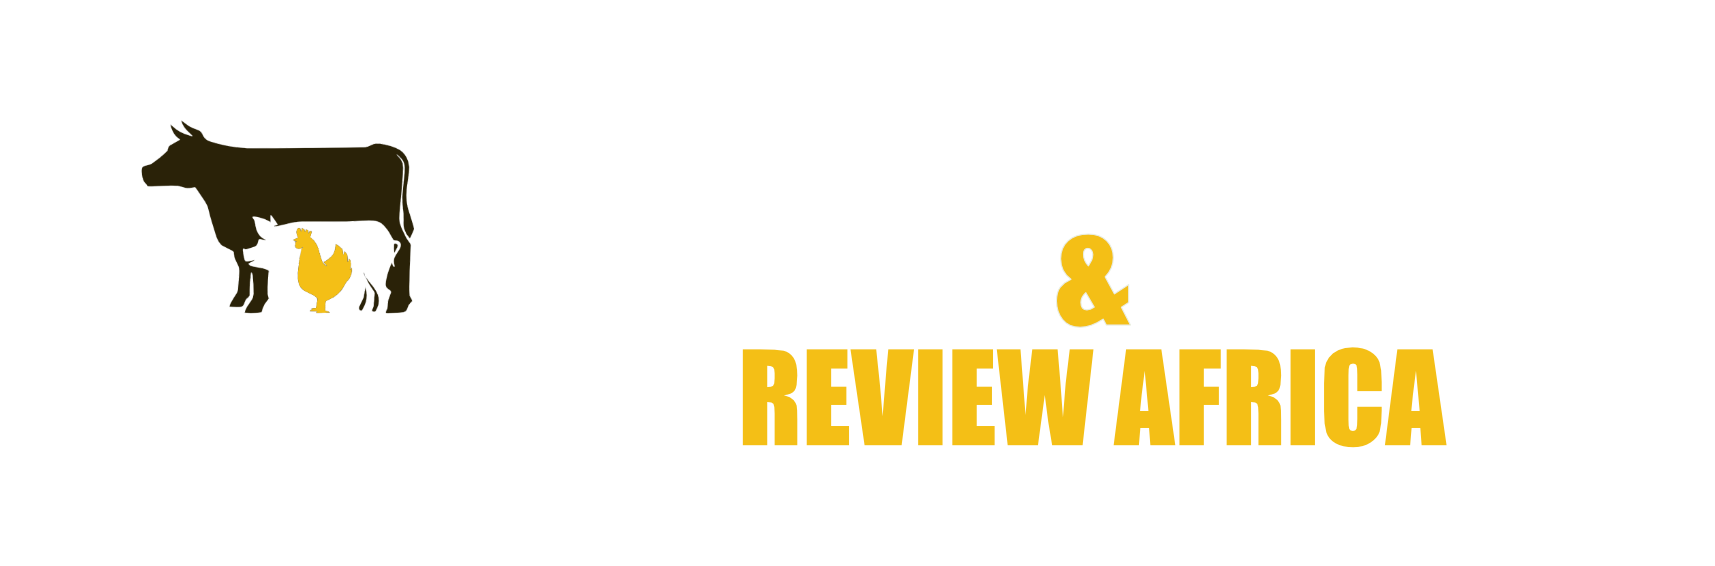 Poultry & Livestock Review Africa